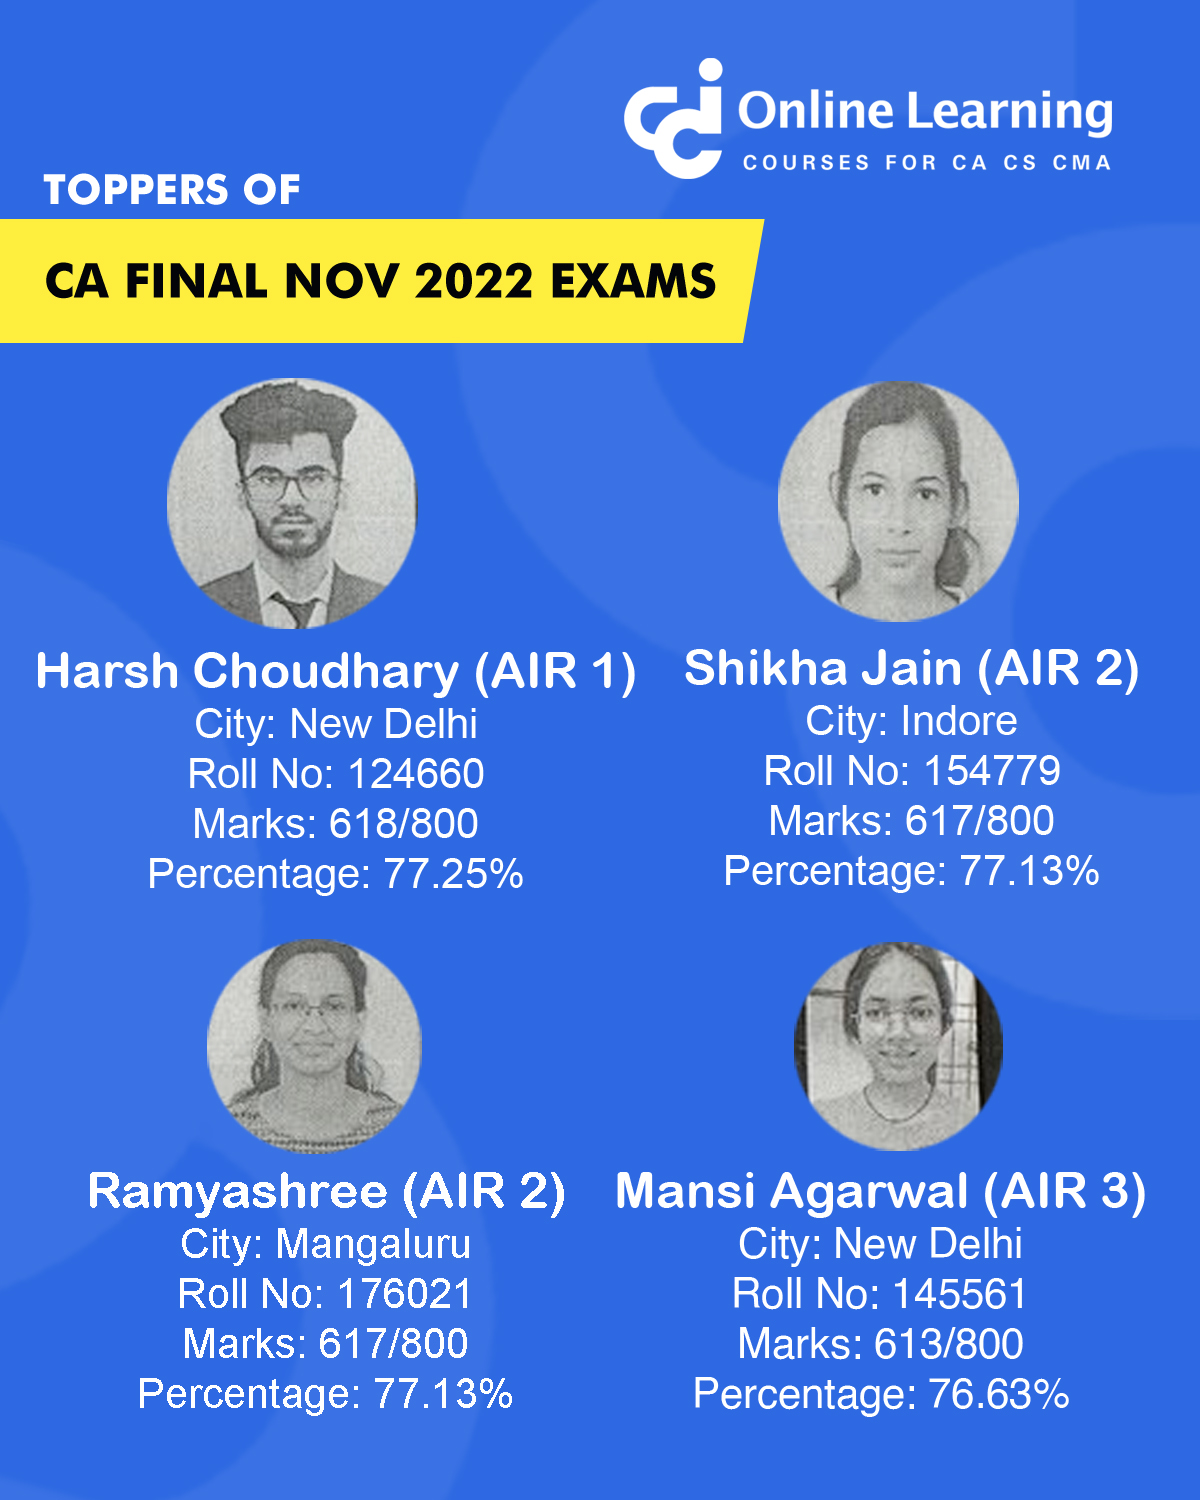 Toppers of CA Final Examination held in Nov 2022